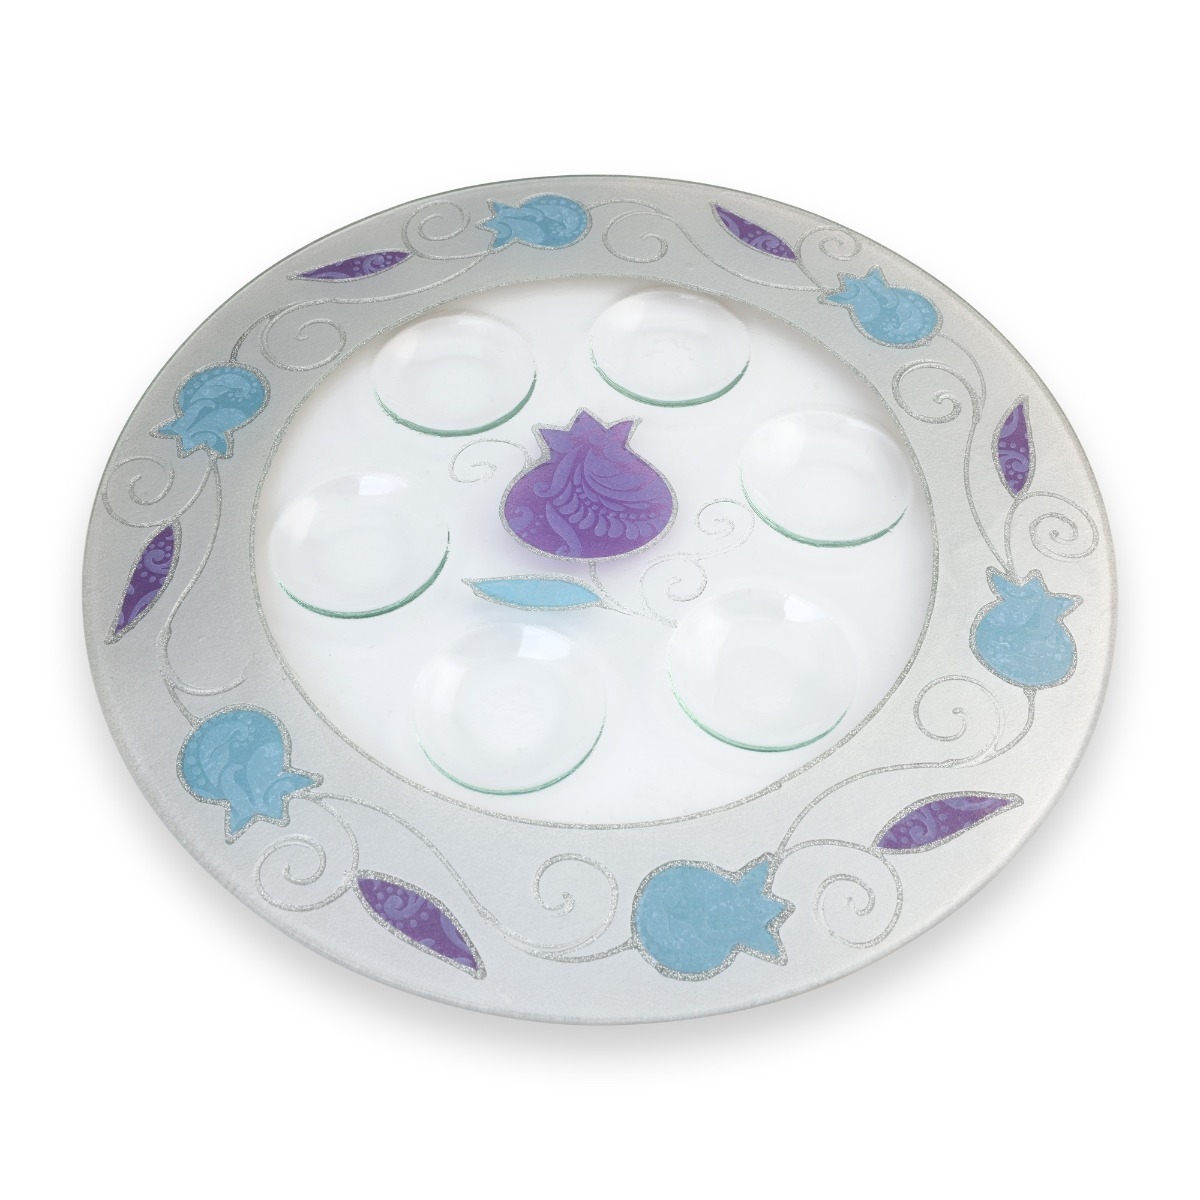 Lily Art Rosh Hashanah Glass Plate with Pomegranate Border - Blue - 1